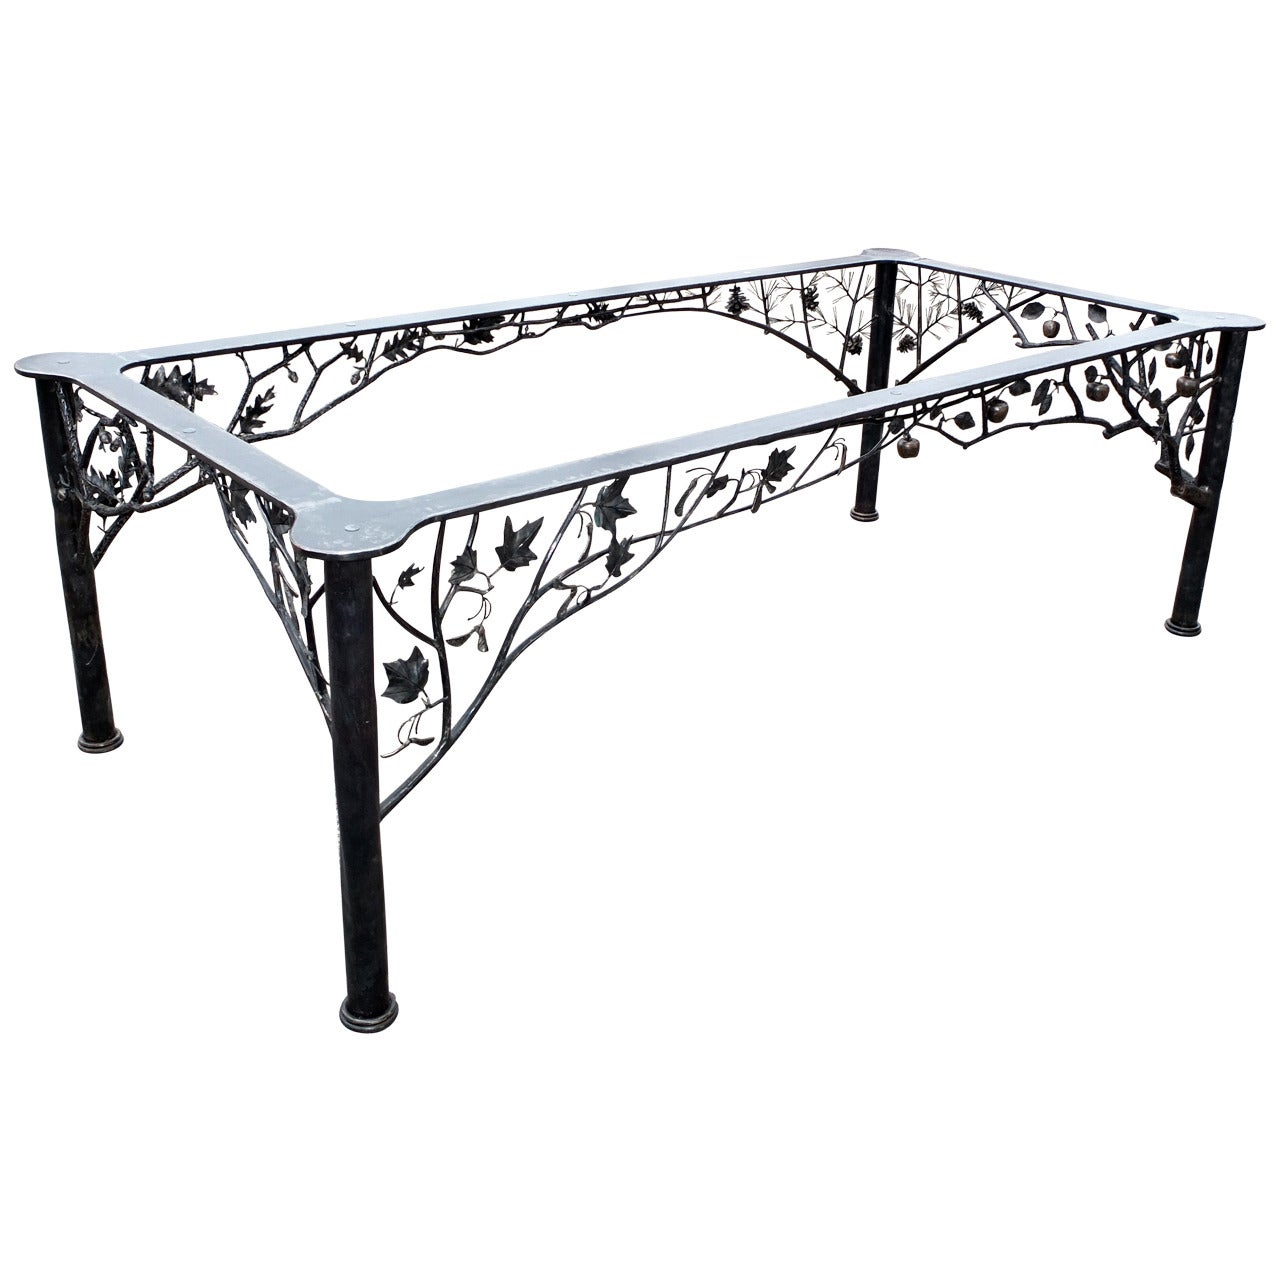 Custom commissioned rectangular fer forge dining table by noted blacksmith, Dereck Glaser. who crafted by hand and Hammer the remarkably realistic botanicals which adorn this table. Each leg depicts a certain season reflected by a tree. Winter is a